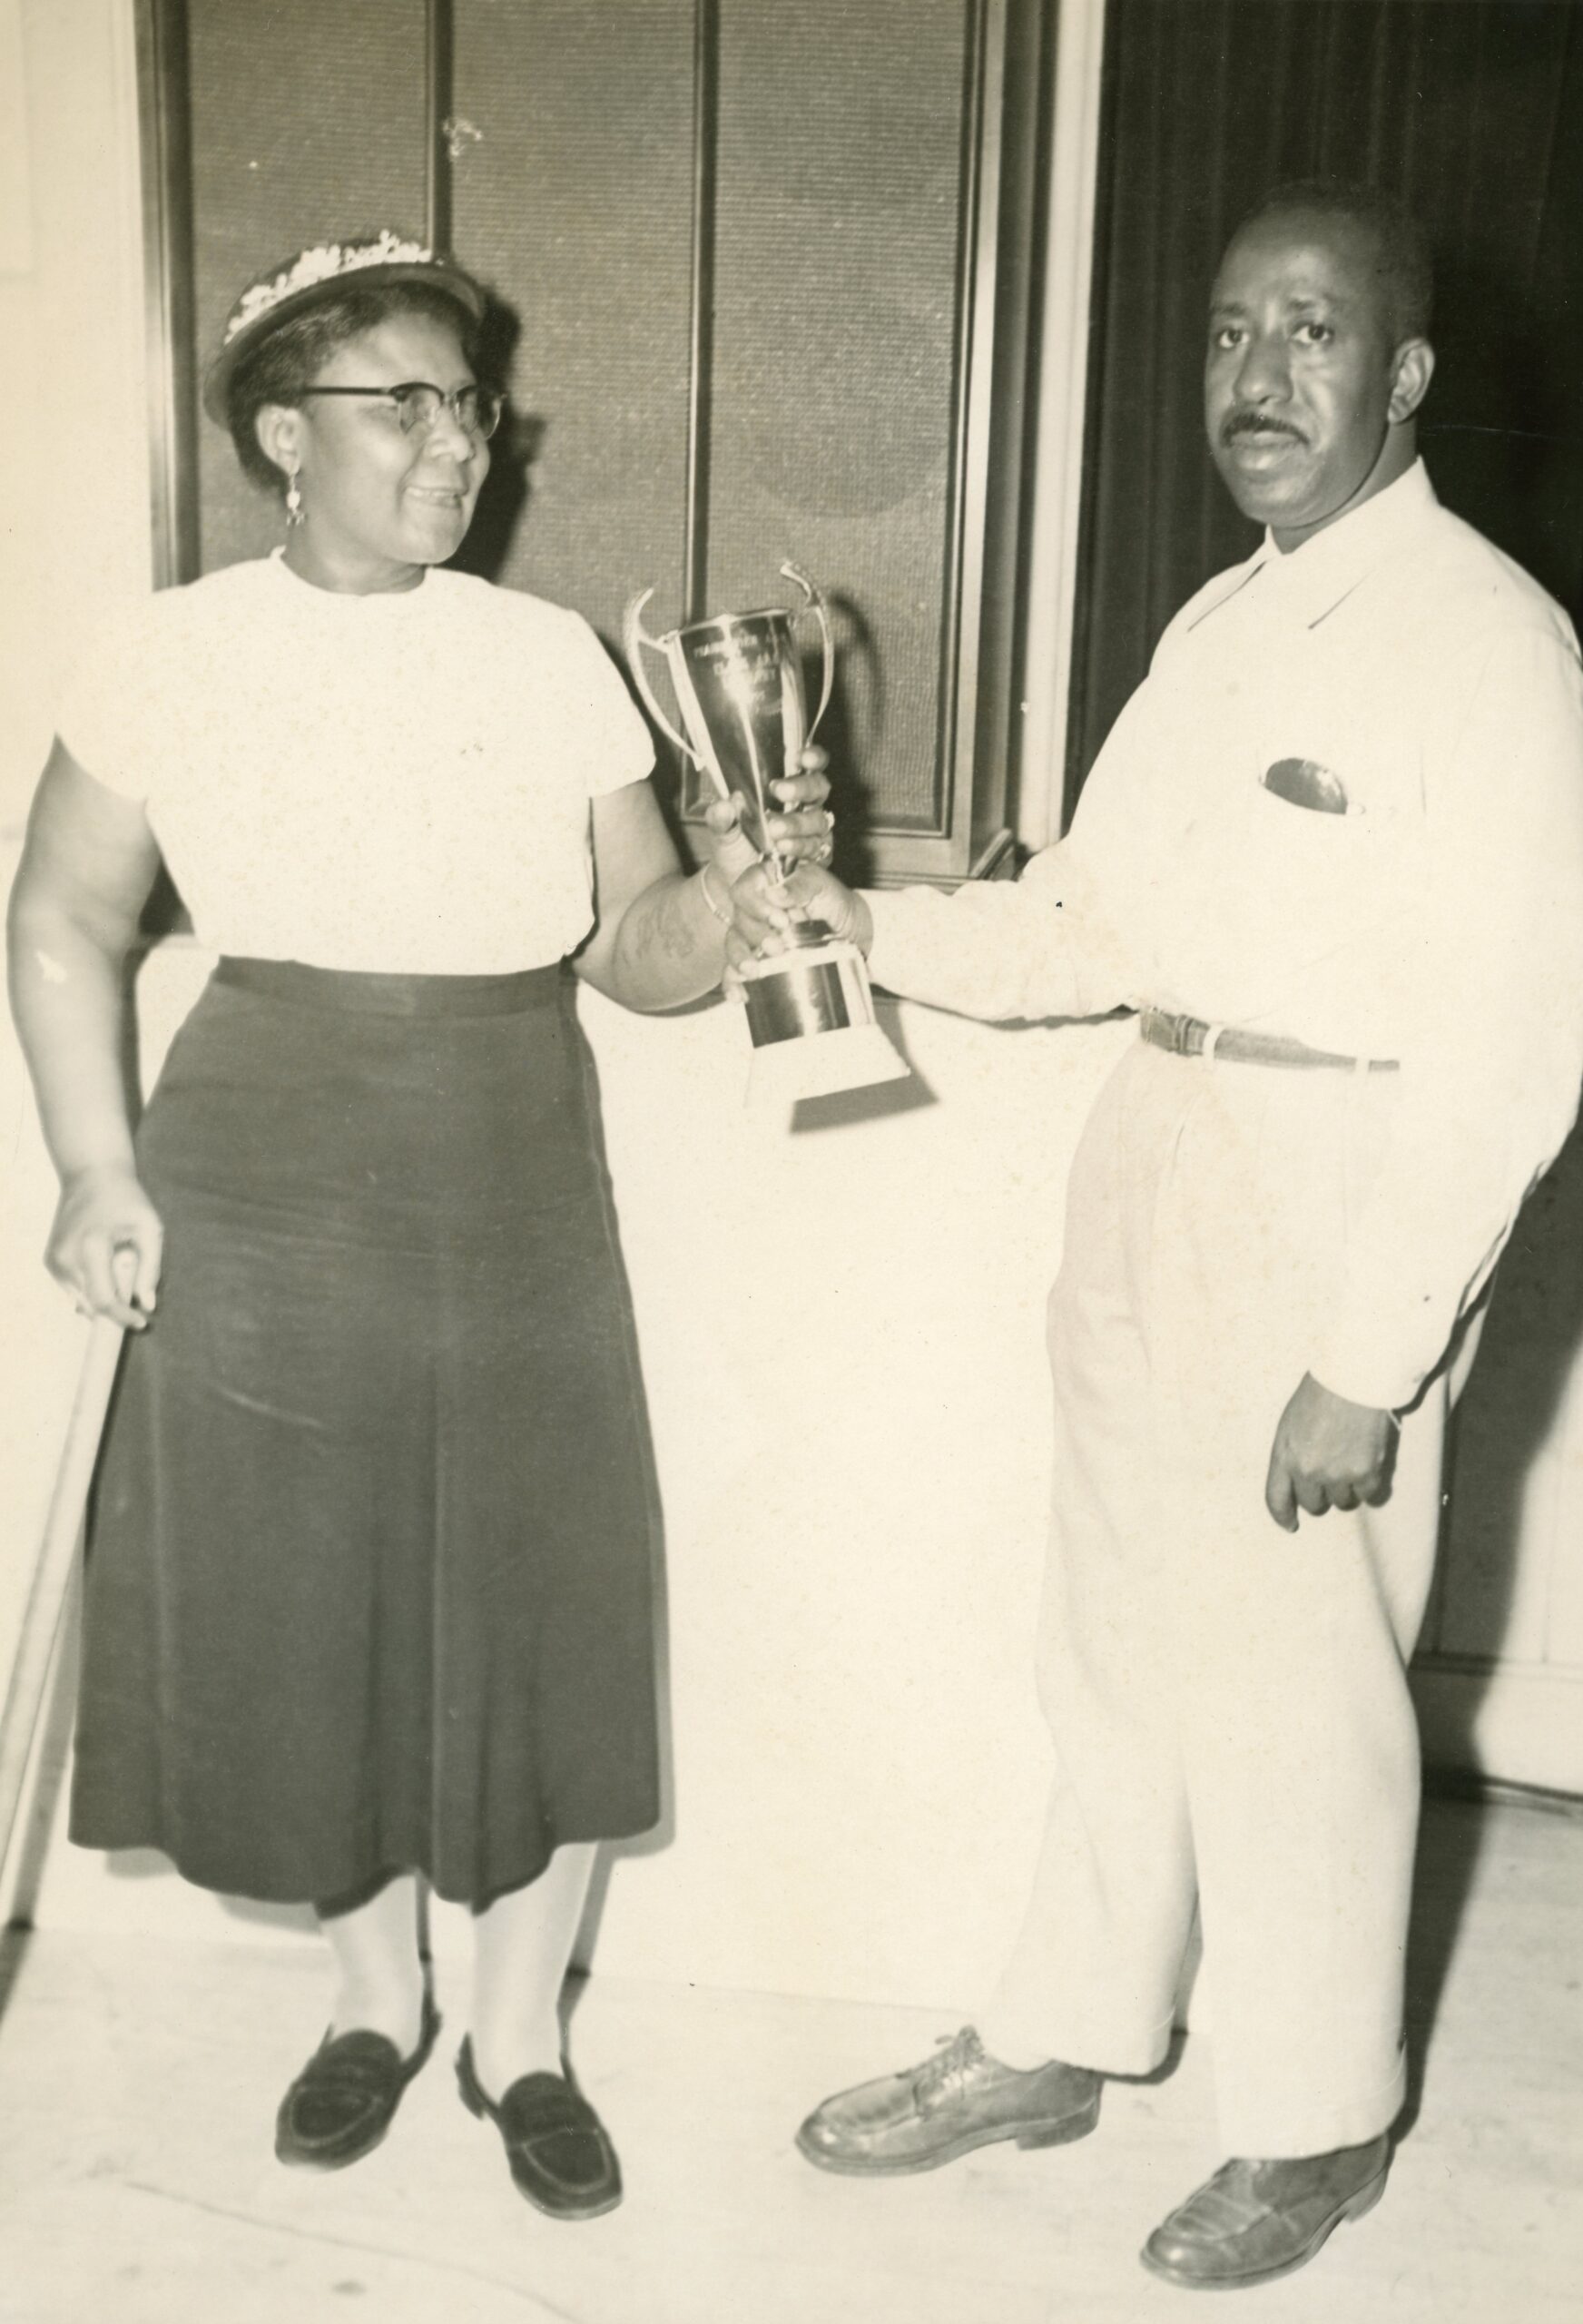 Dr. George Ruble Woolfolk delivering a much deserved reward in the 1950s